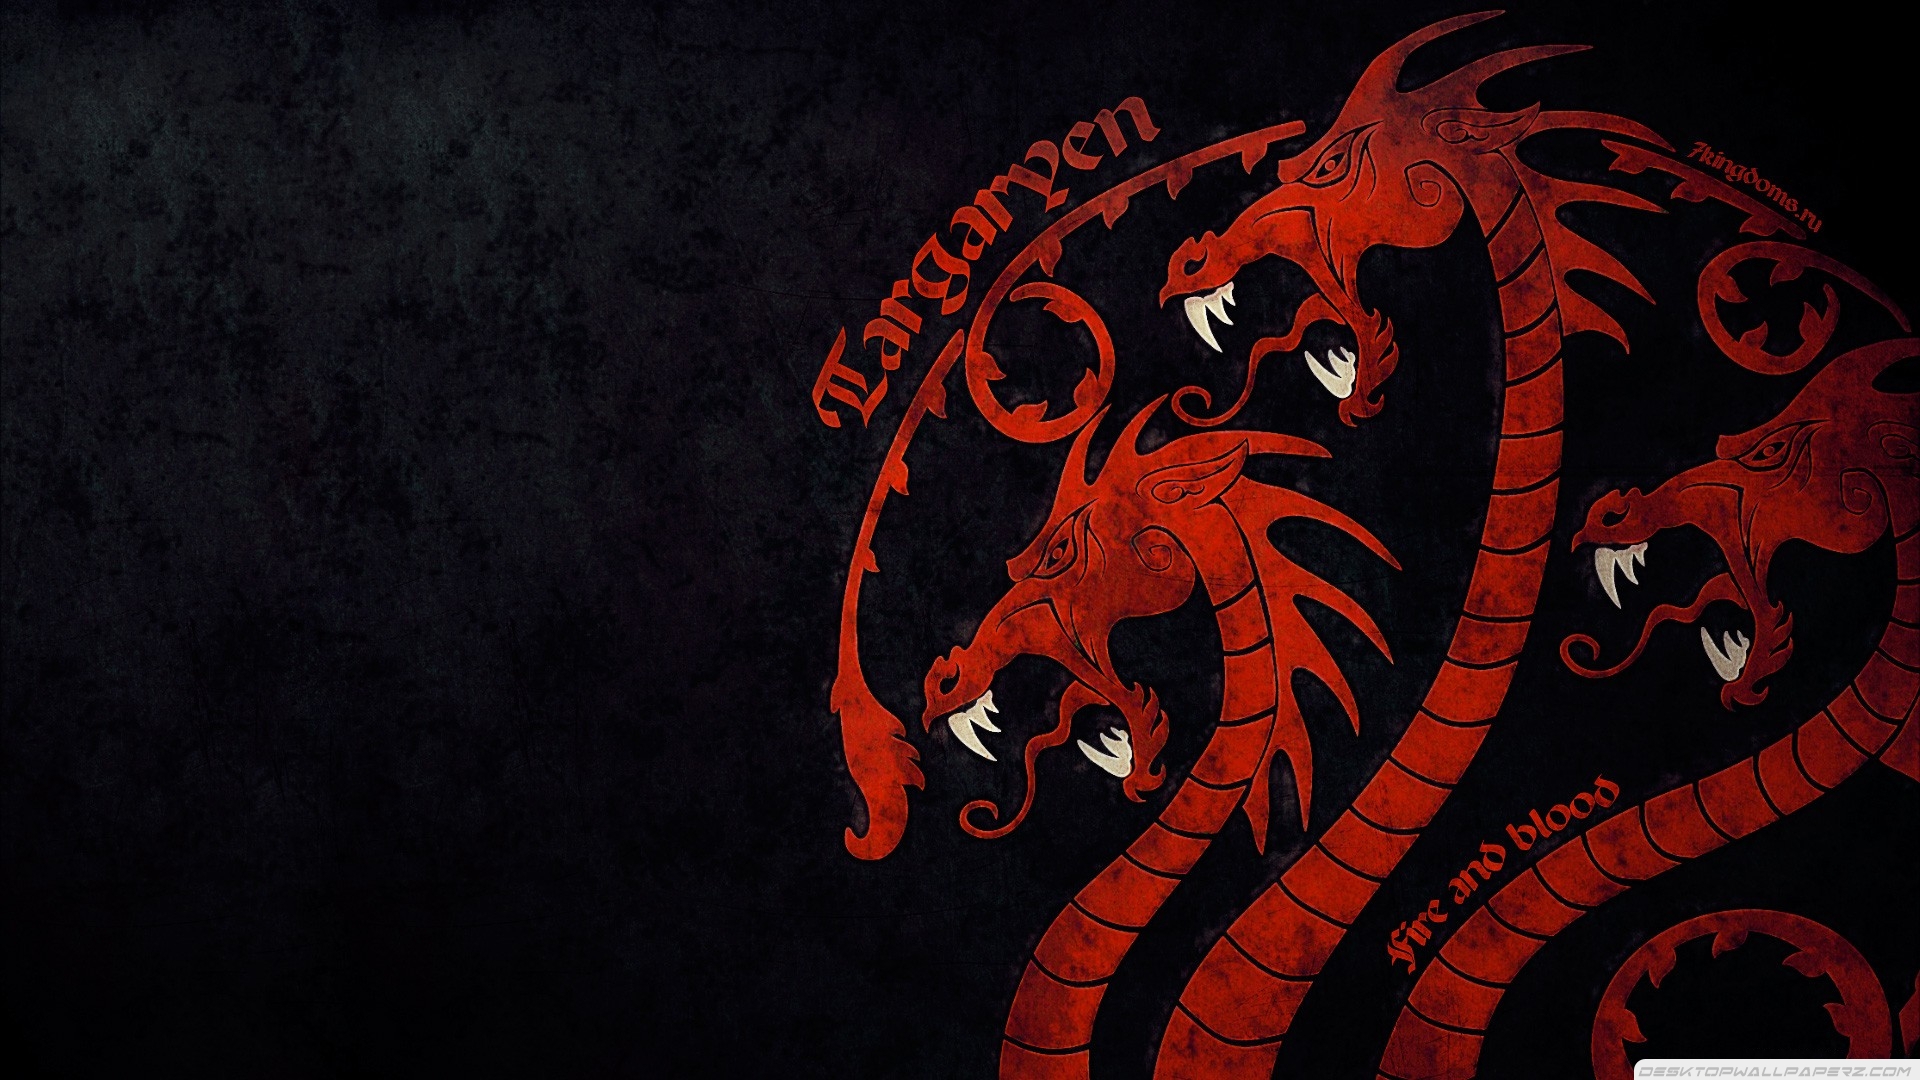 Song Of Ice And Fire HD Wallpaper Res